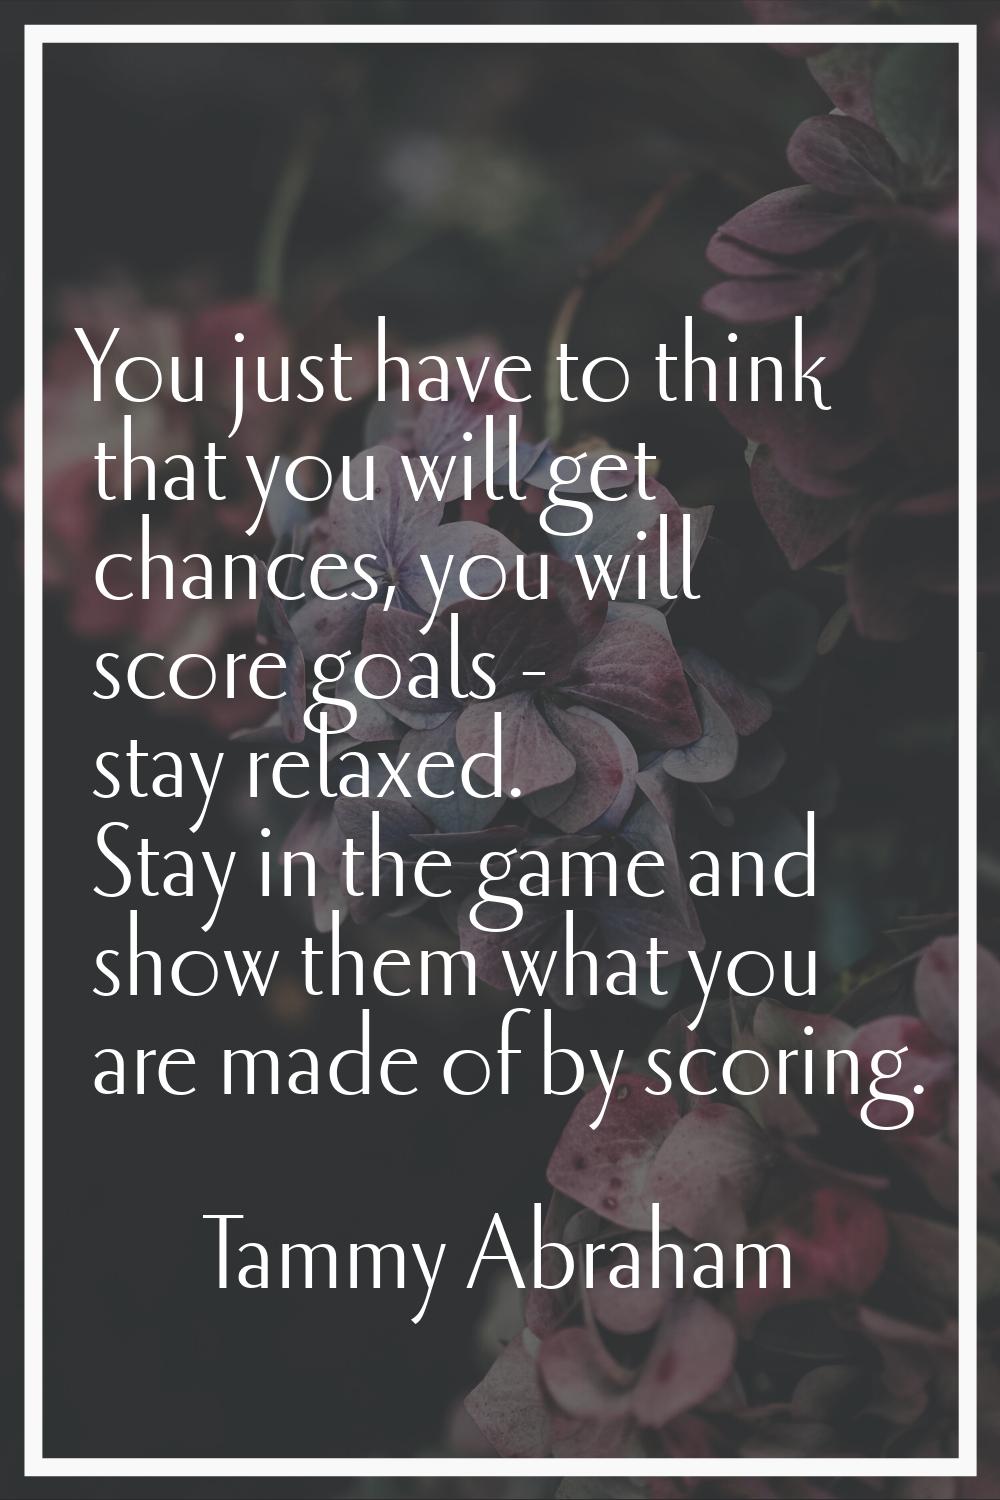 You just have to think that you will get chances, you will score goals - stay relaxed. Stay in the 